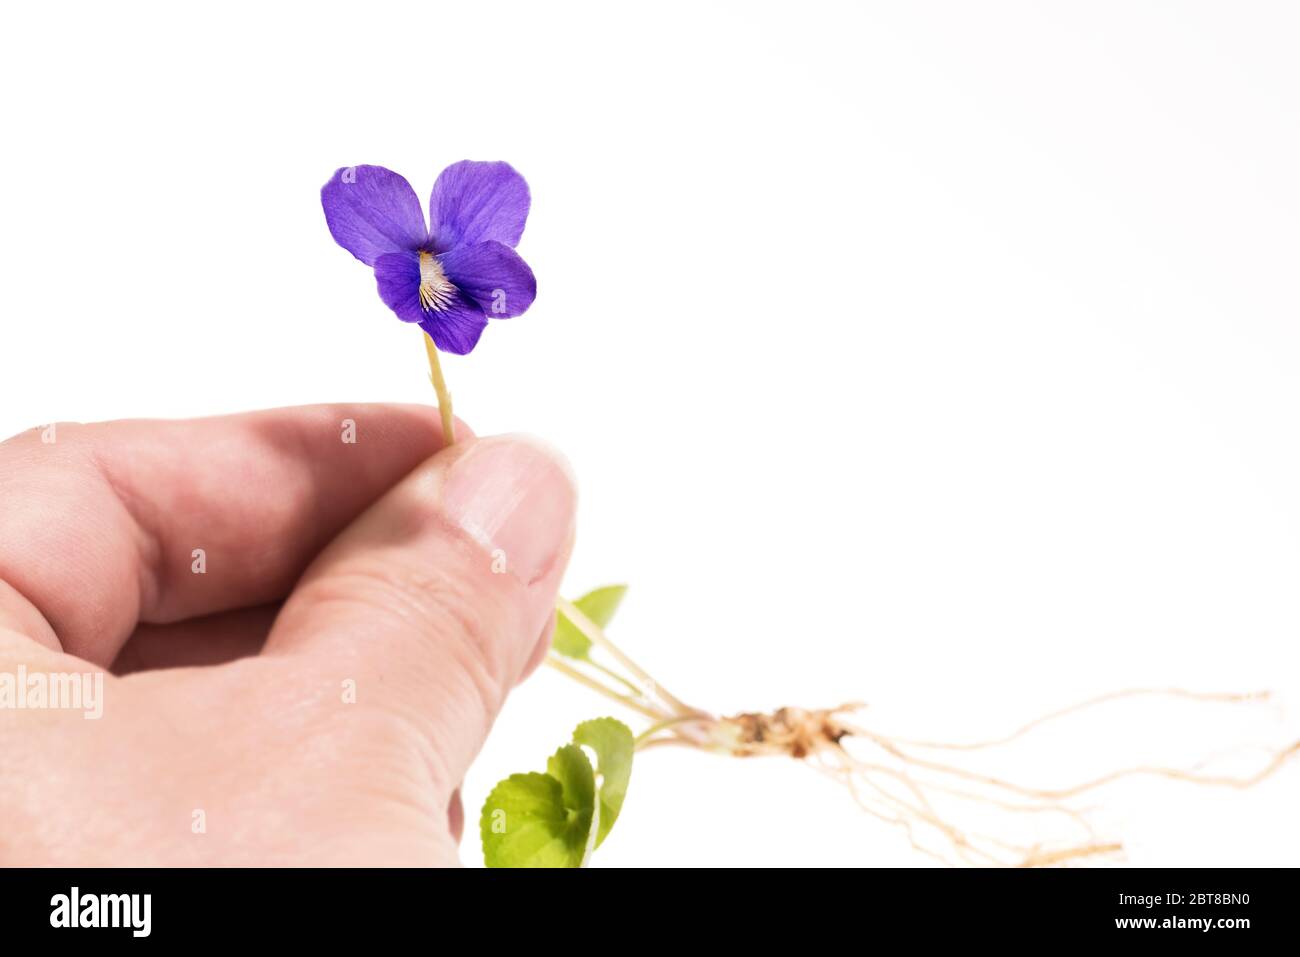 Woman's hand holding Common Blue Violet by the stem, showing flower, leaves, roots. Stock Photo